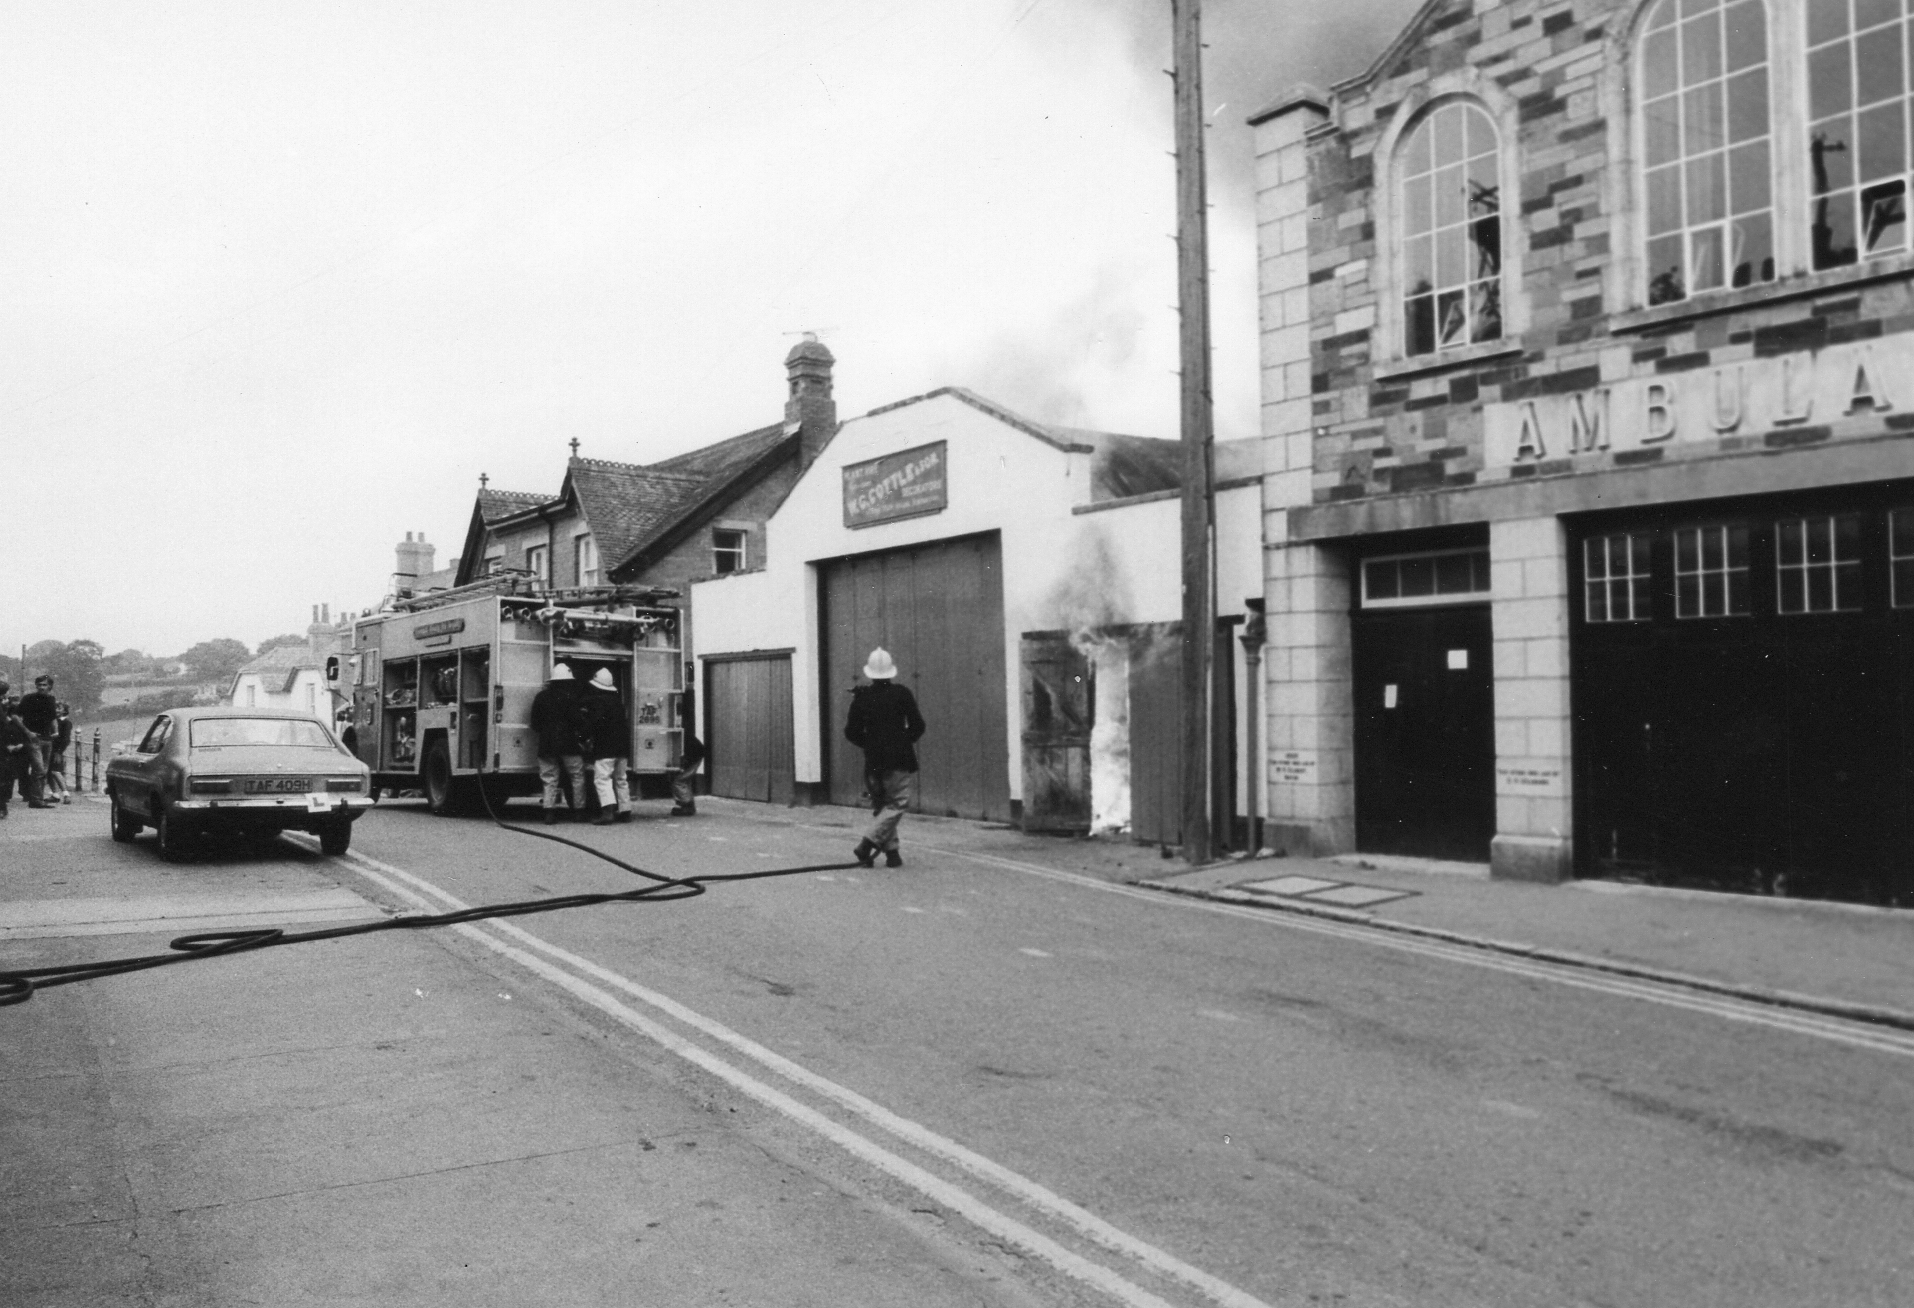 Fire at Charlie Cottle's Workshop in Westgate Street, June 17th, 1982. Photo courtesy of Gary Chapman.